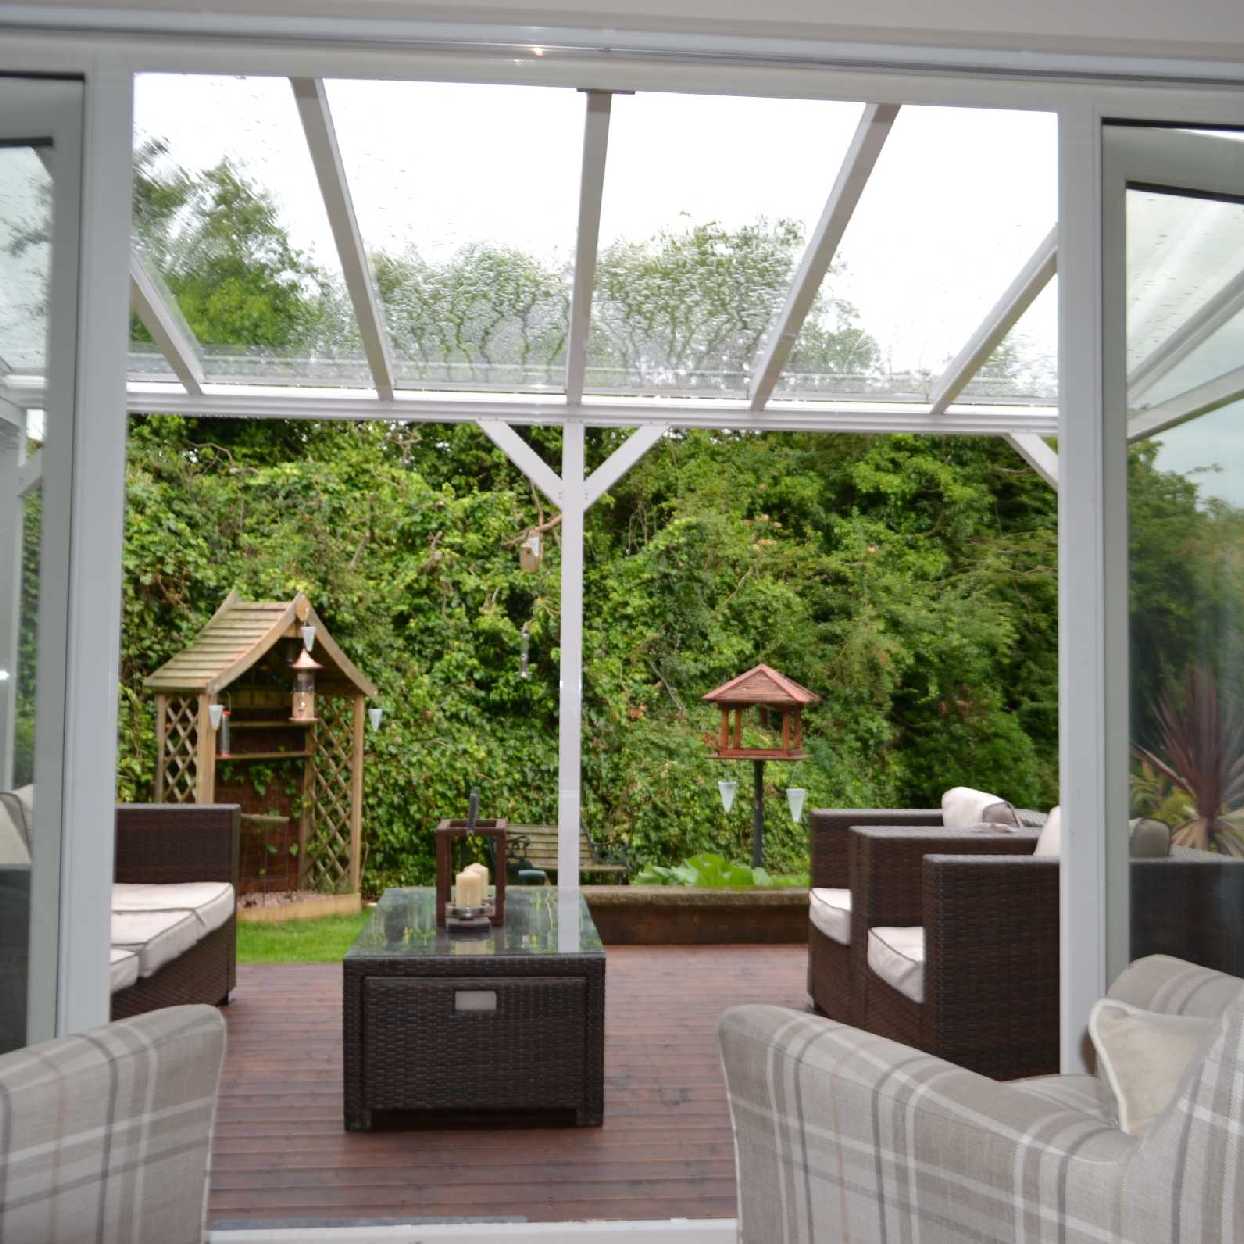 Great selection of Omega Smart Lean-To Canopy, White UNGLAZED for 6mm Glazing - 4.2m (W) x 2.5m (P), (3) Supporting Posts